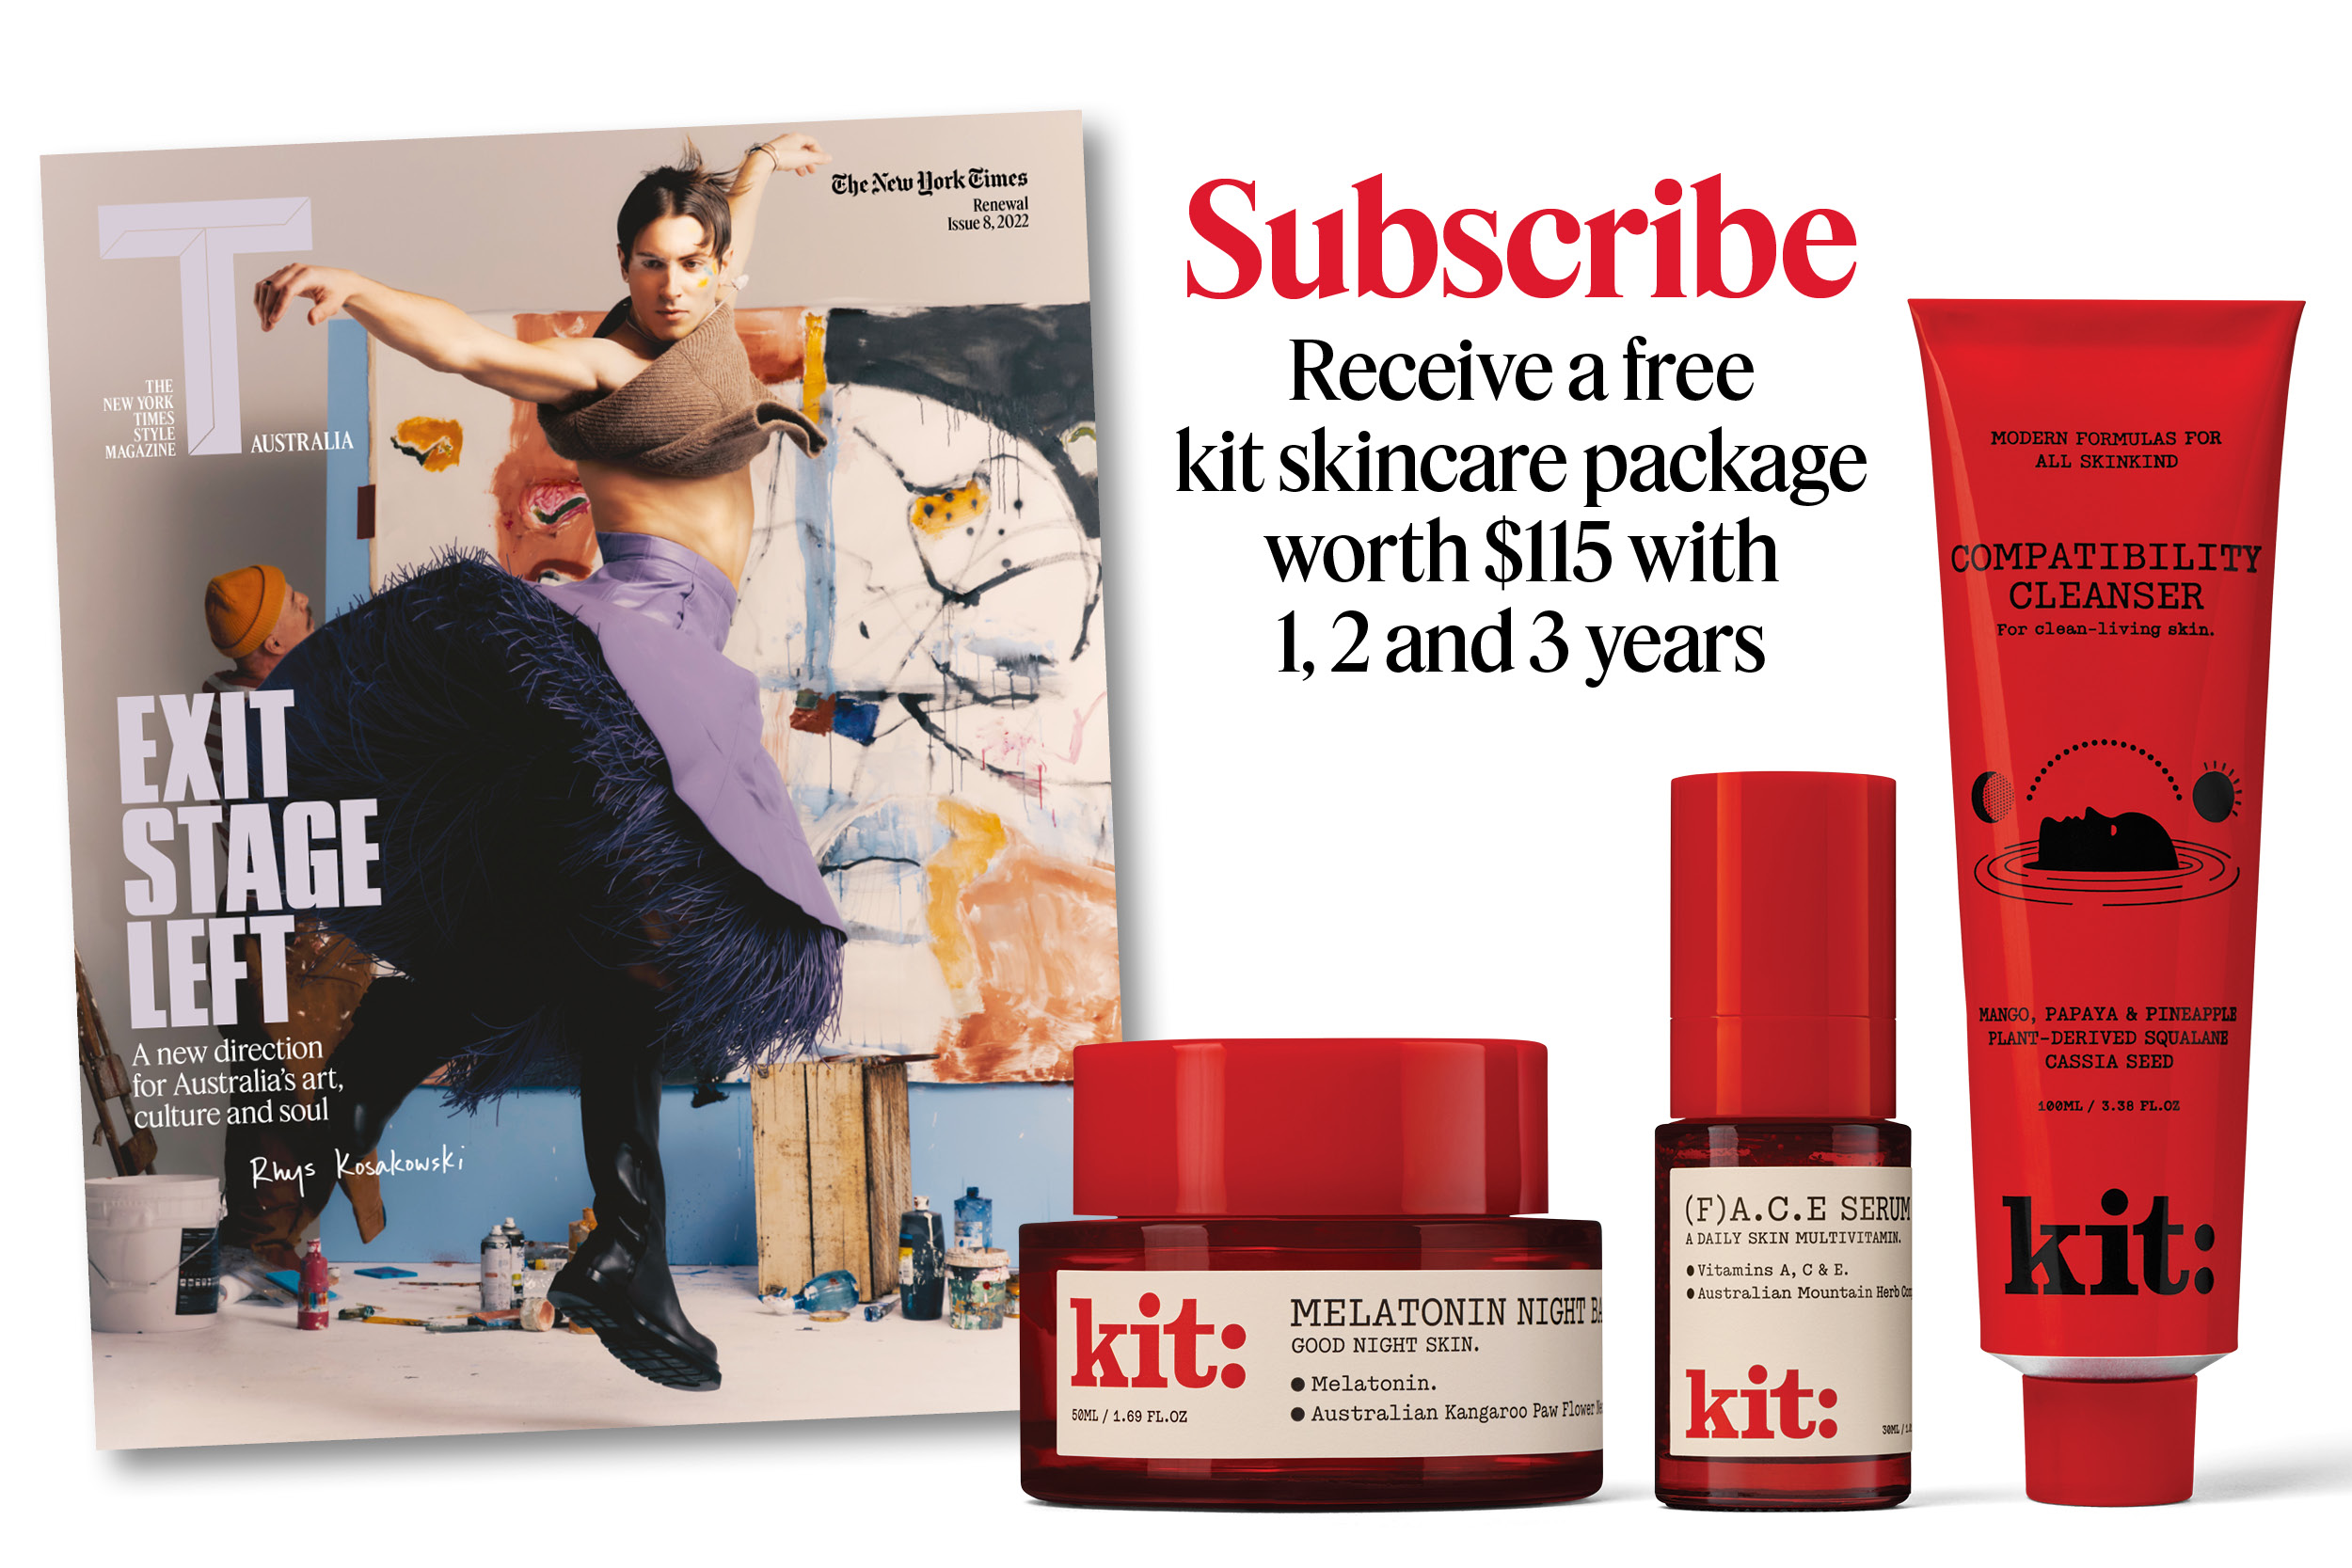 T Australia Issue 8 Subscription Offer